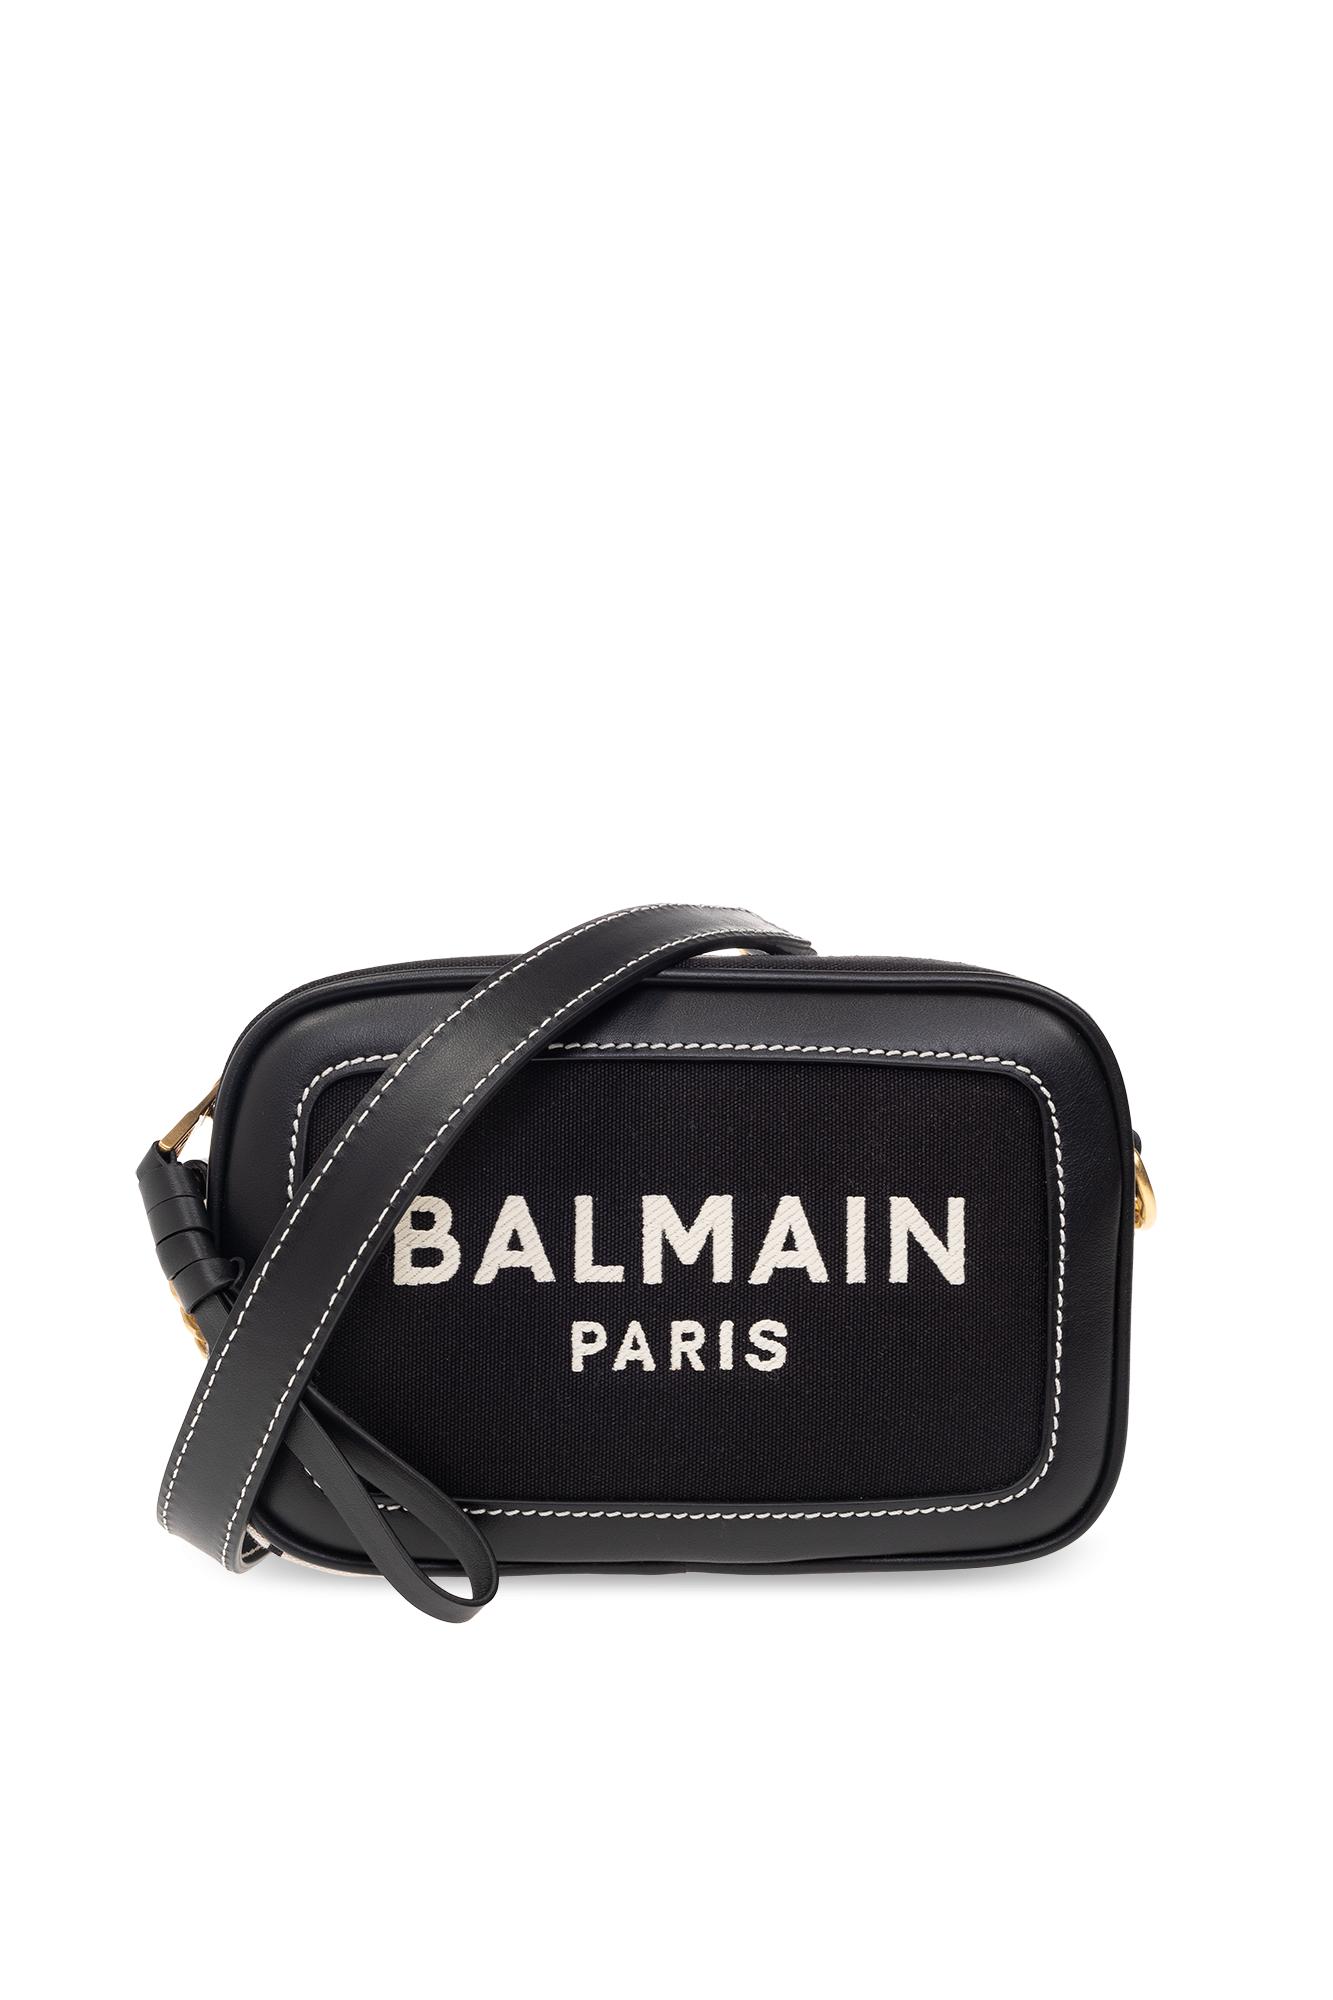 Women's Celine Belt bags, waist bags and fanny packs from $1,395